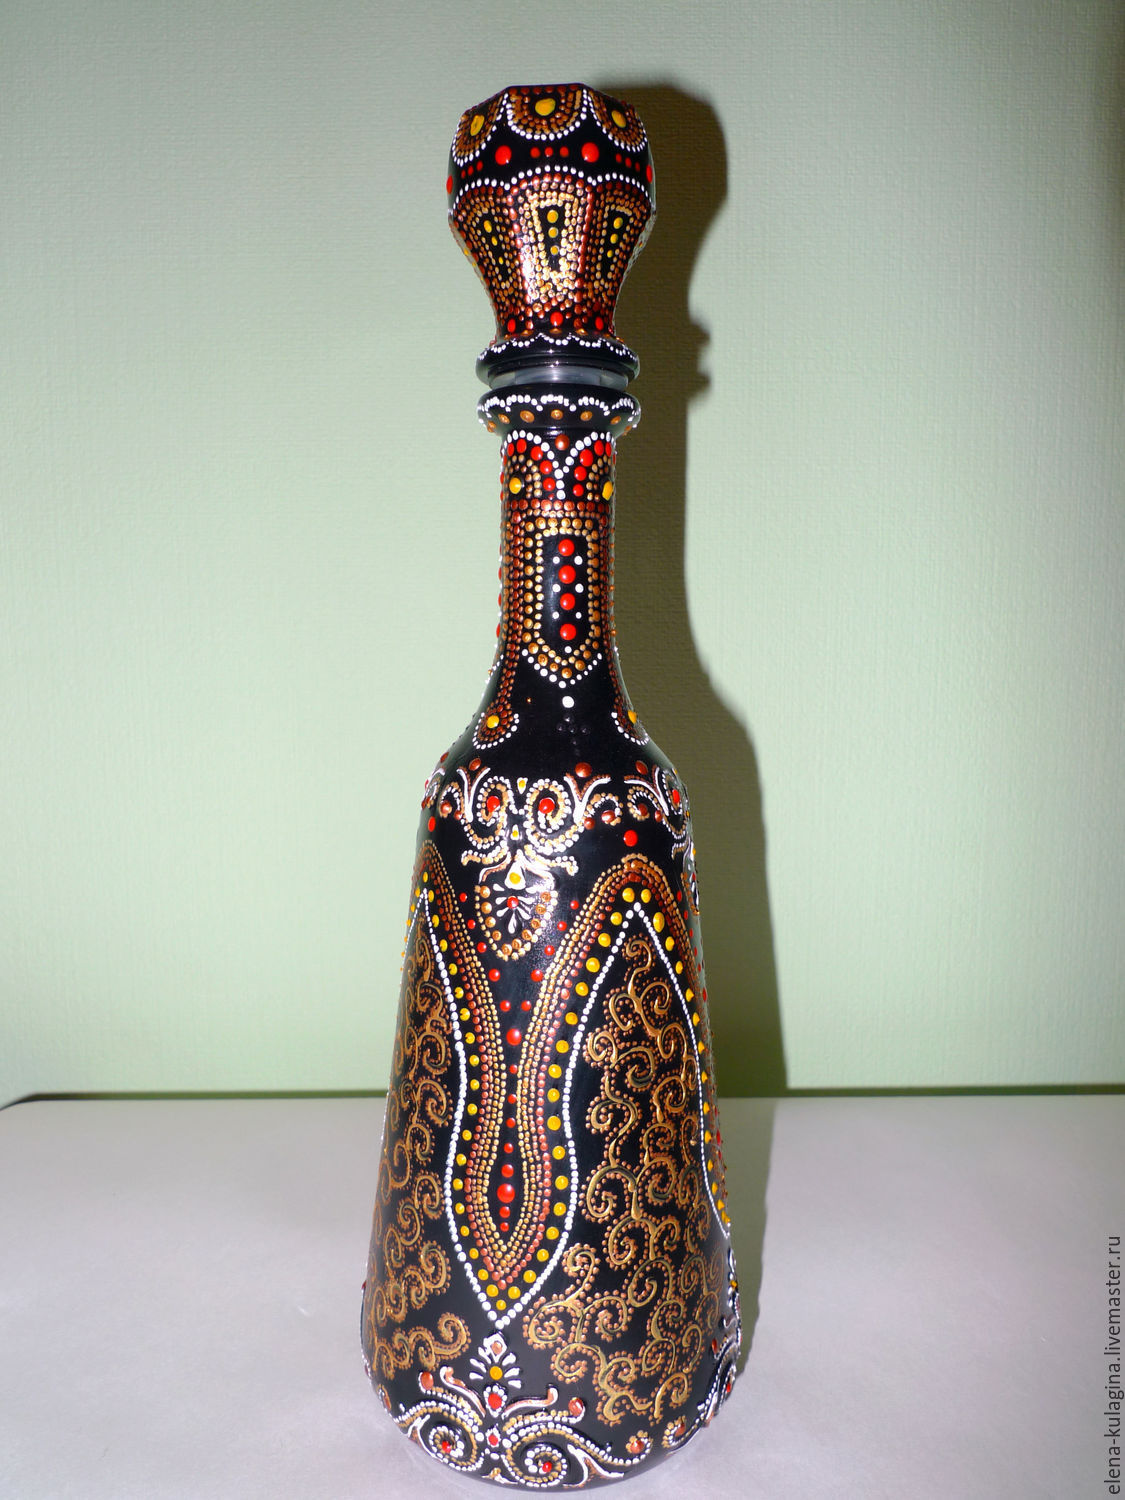 Decanter glass 'Oriental night', Decanters, Moscow,  Фото №1